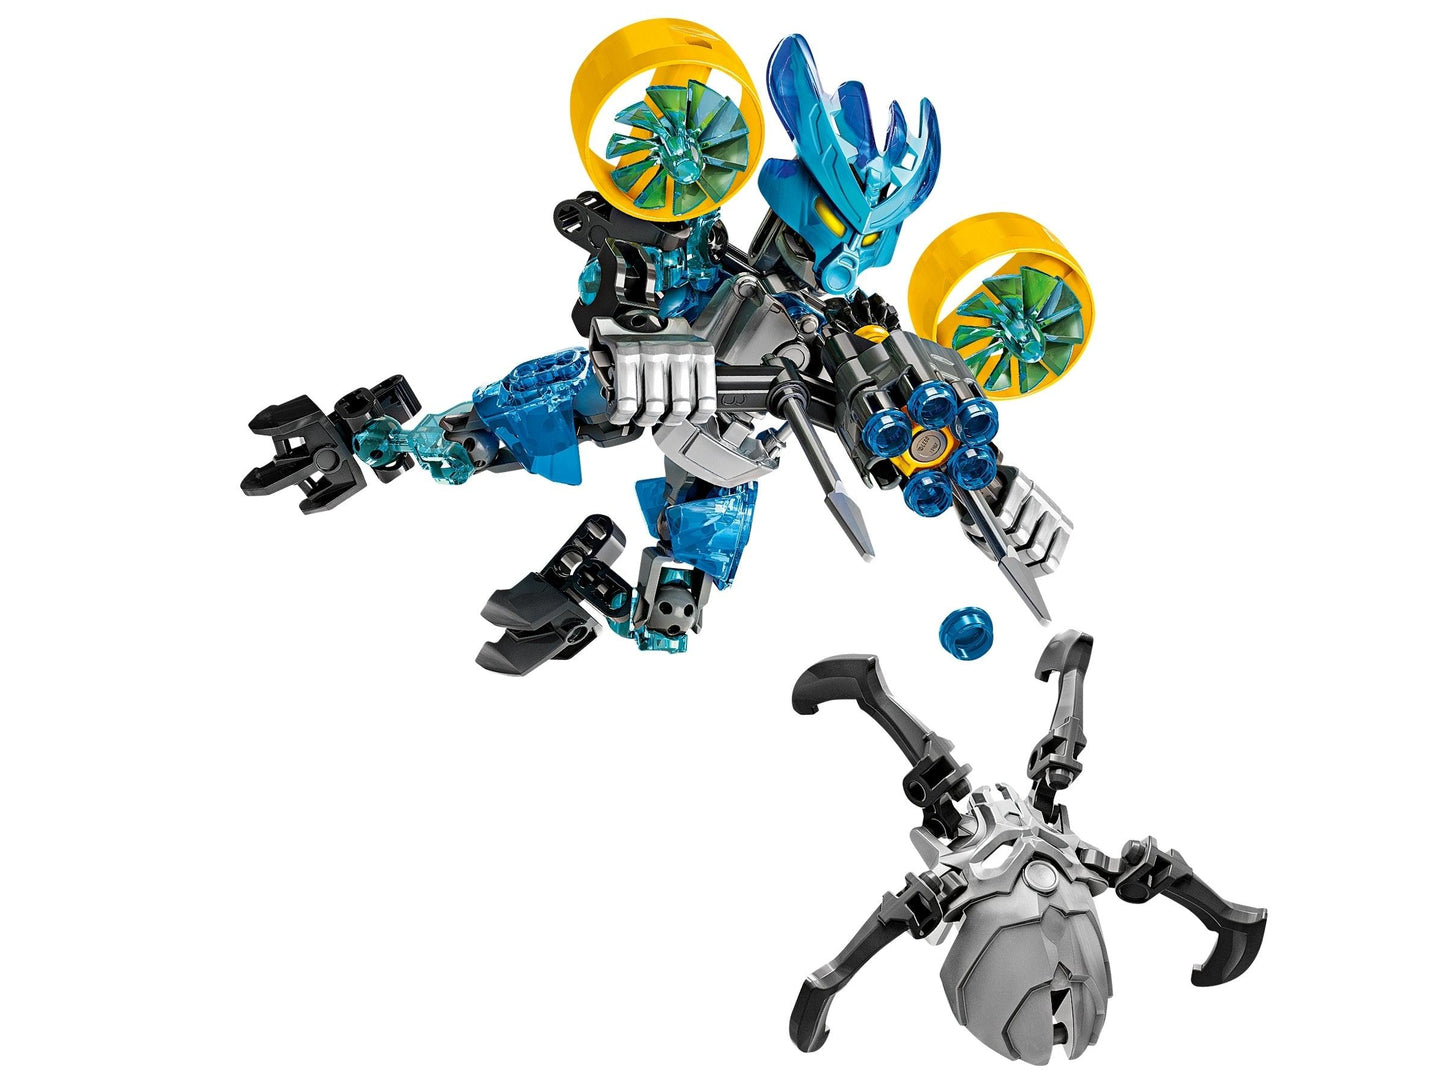 LEGO Protector of Water 70780 Bionicle @ 2TTOYS 2TTOYS €. 19.99